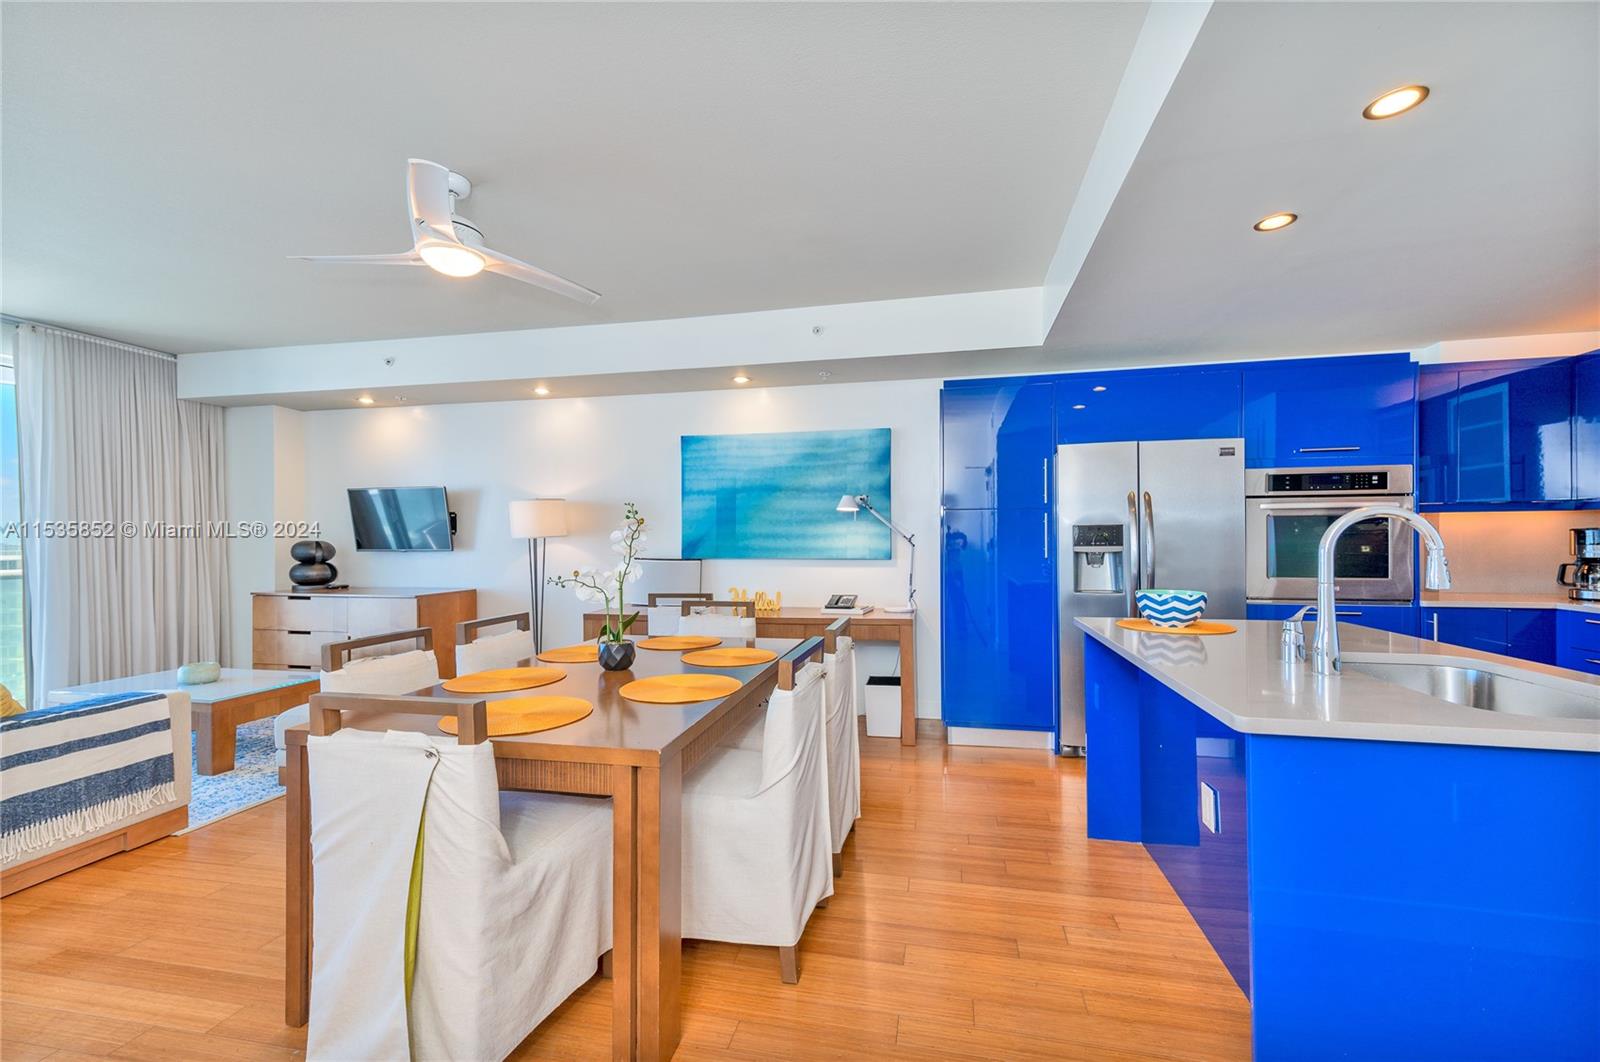 a large kitchen with kitchen island a large counter space and stainless steel appliances